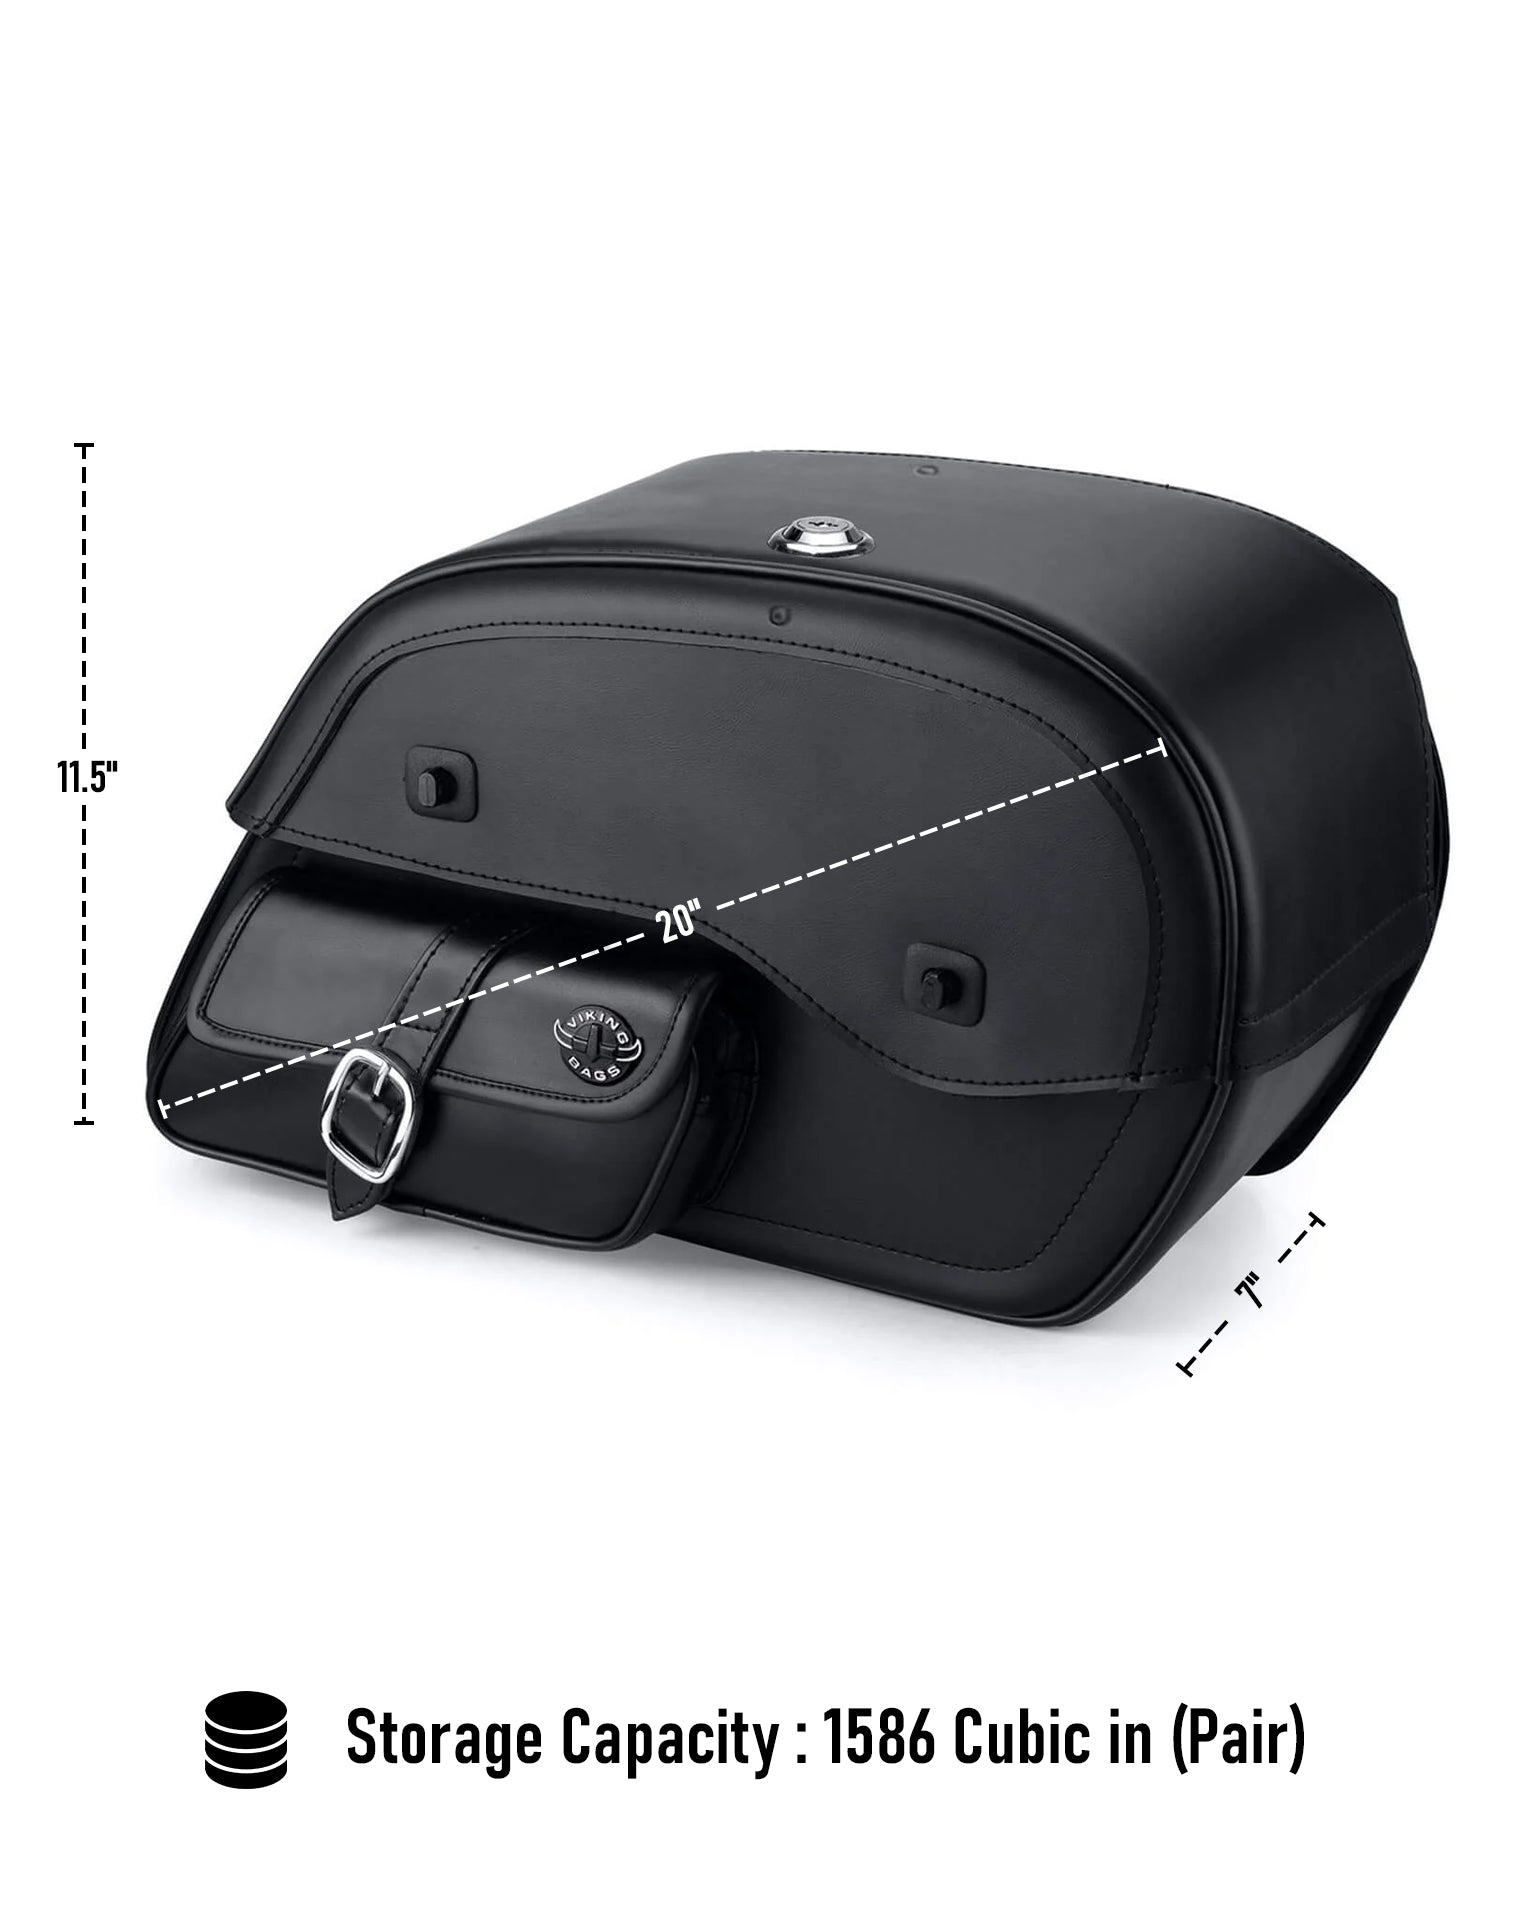 Viking Essential Side Pocket Large Shock Cutout Leather Motorcycle Saddlebags For Harley Sportster 1200 Custom Xl1200C Xlh1200C Can Store Your Ridings Gears